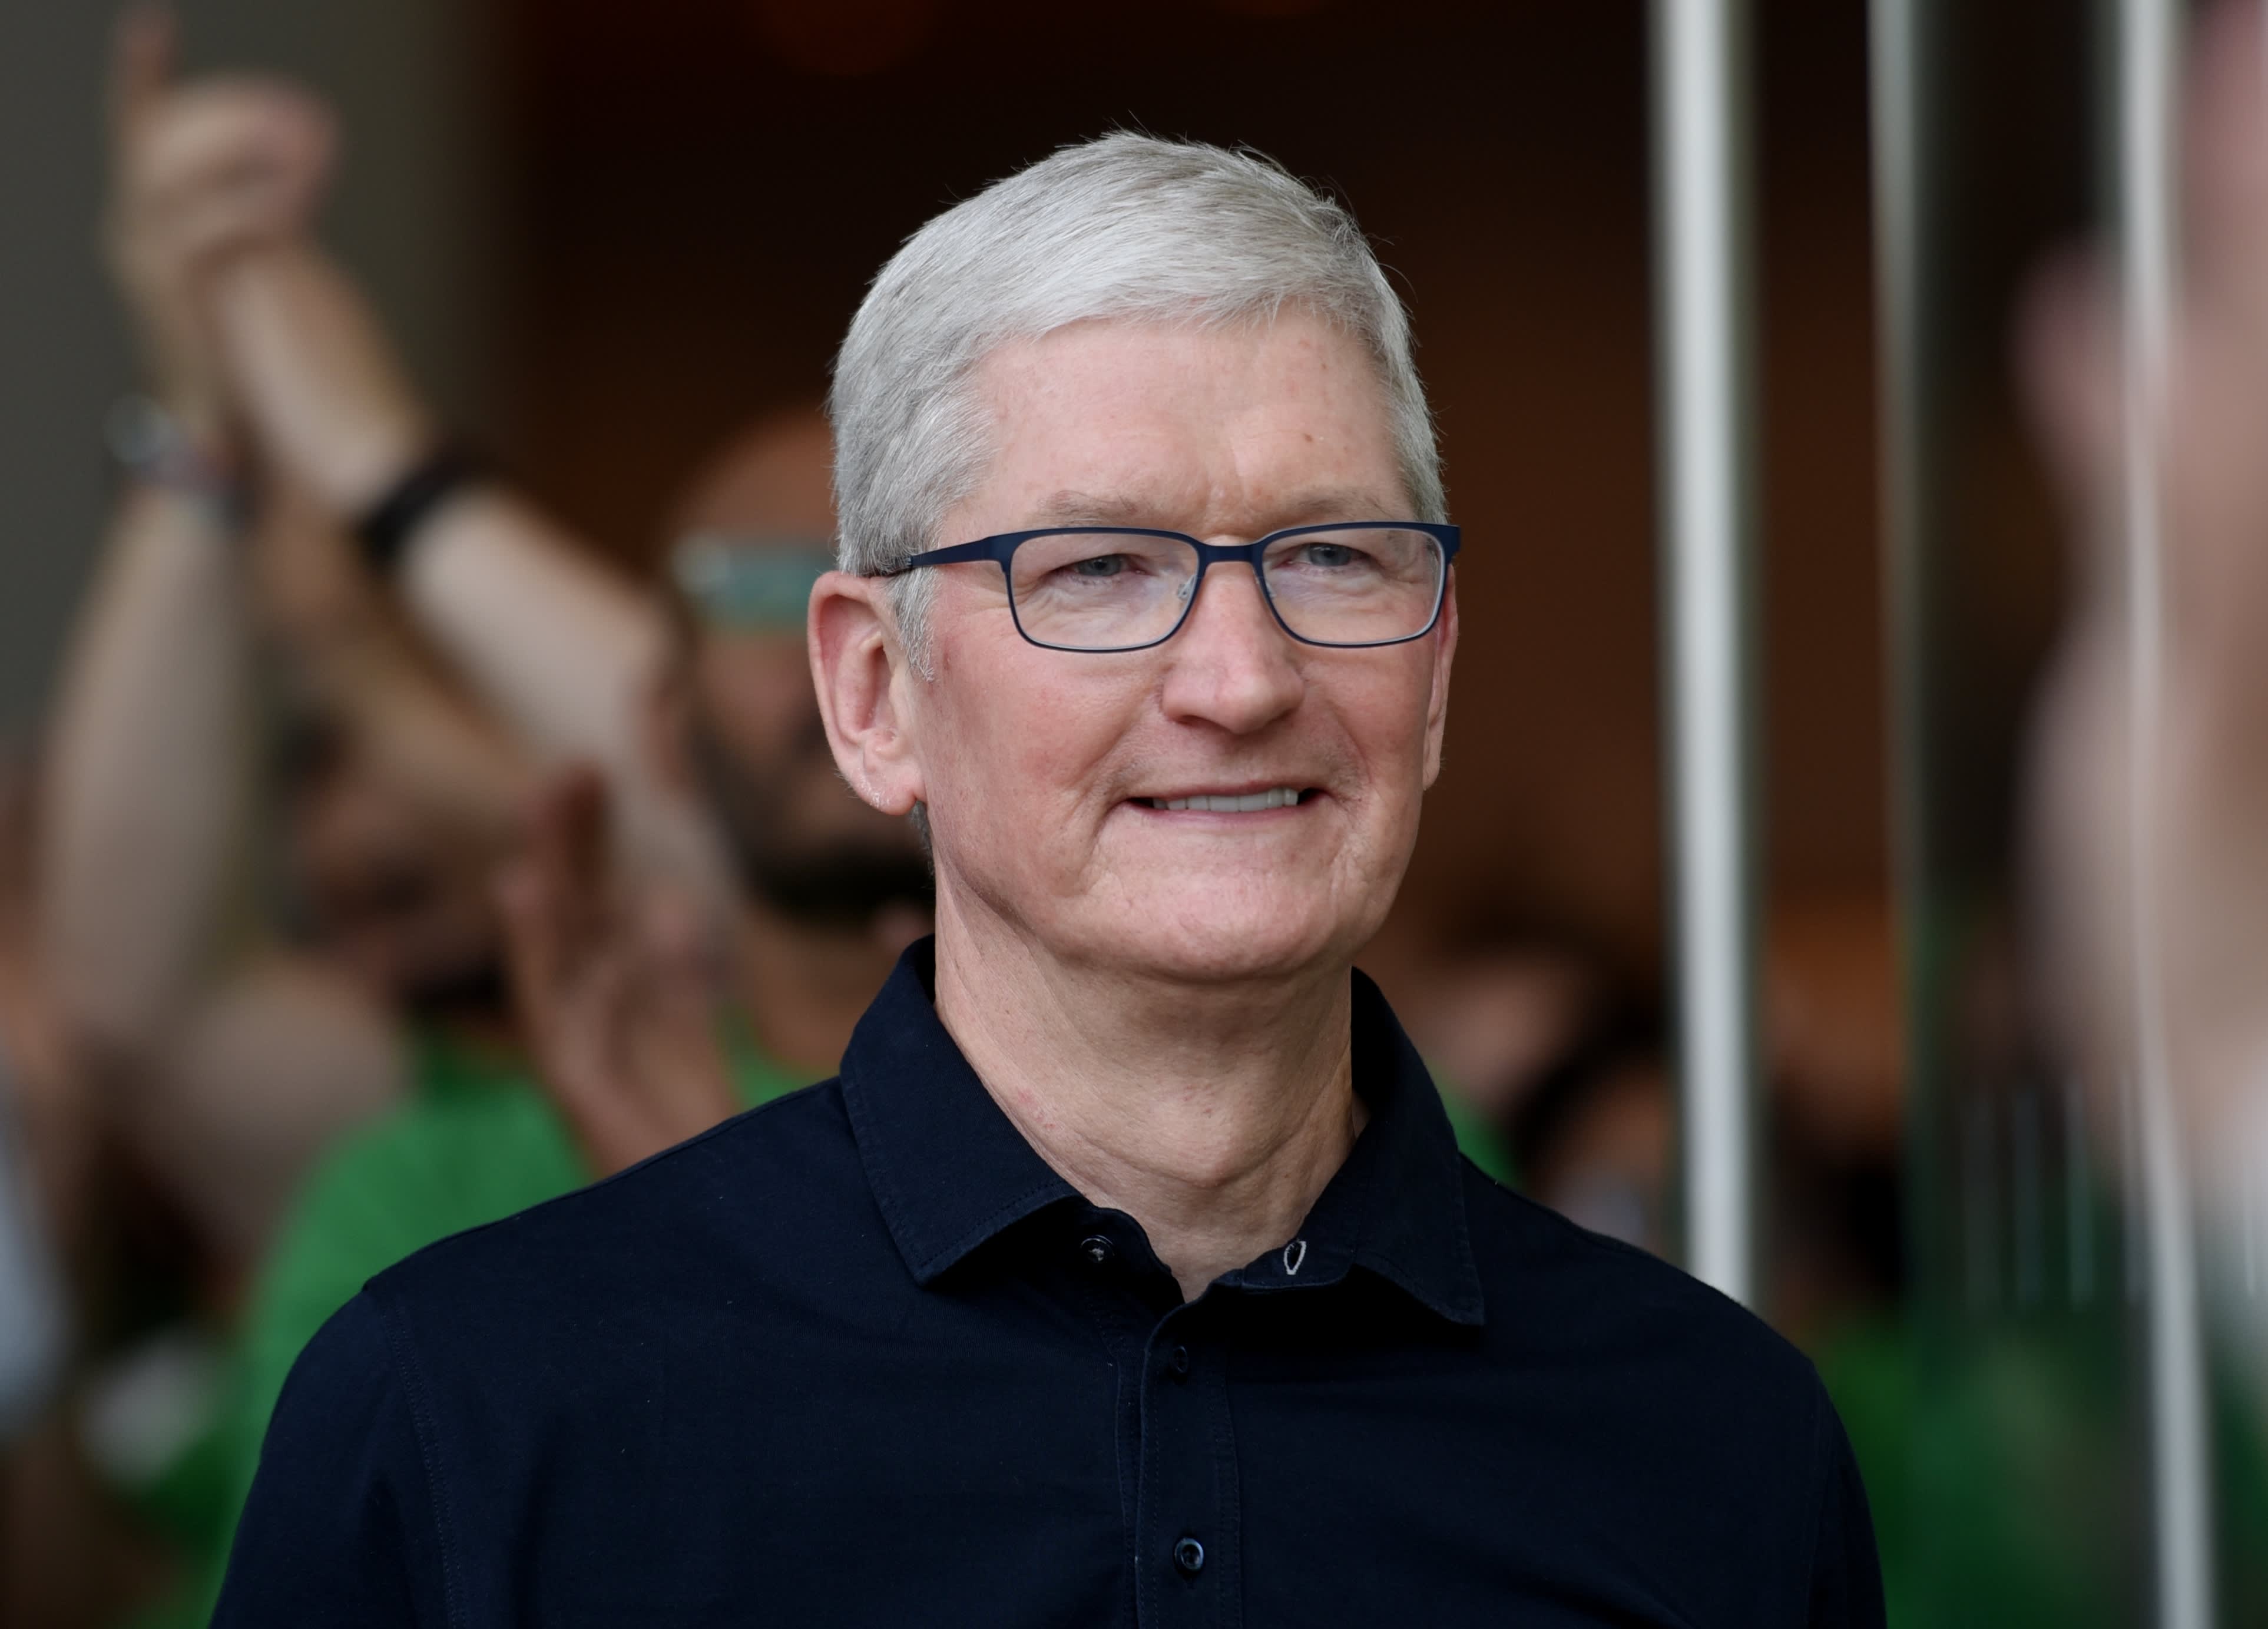 Apple layoffs are a 'last resort,' CEO Tim Cook says